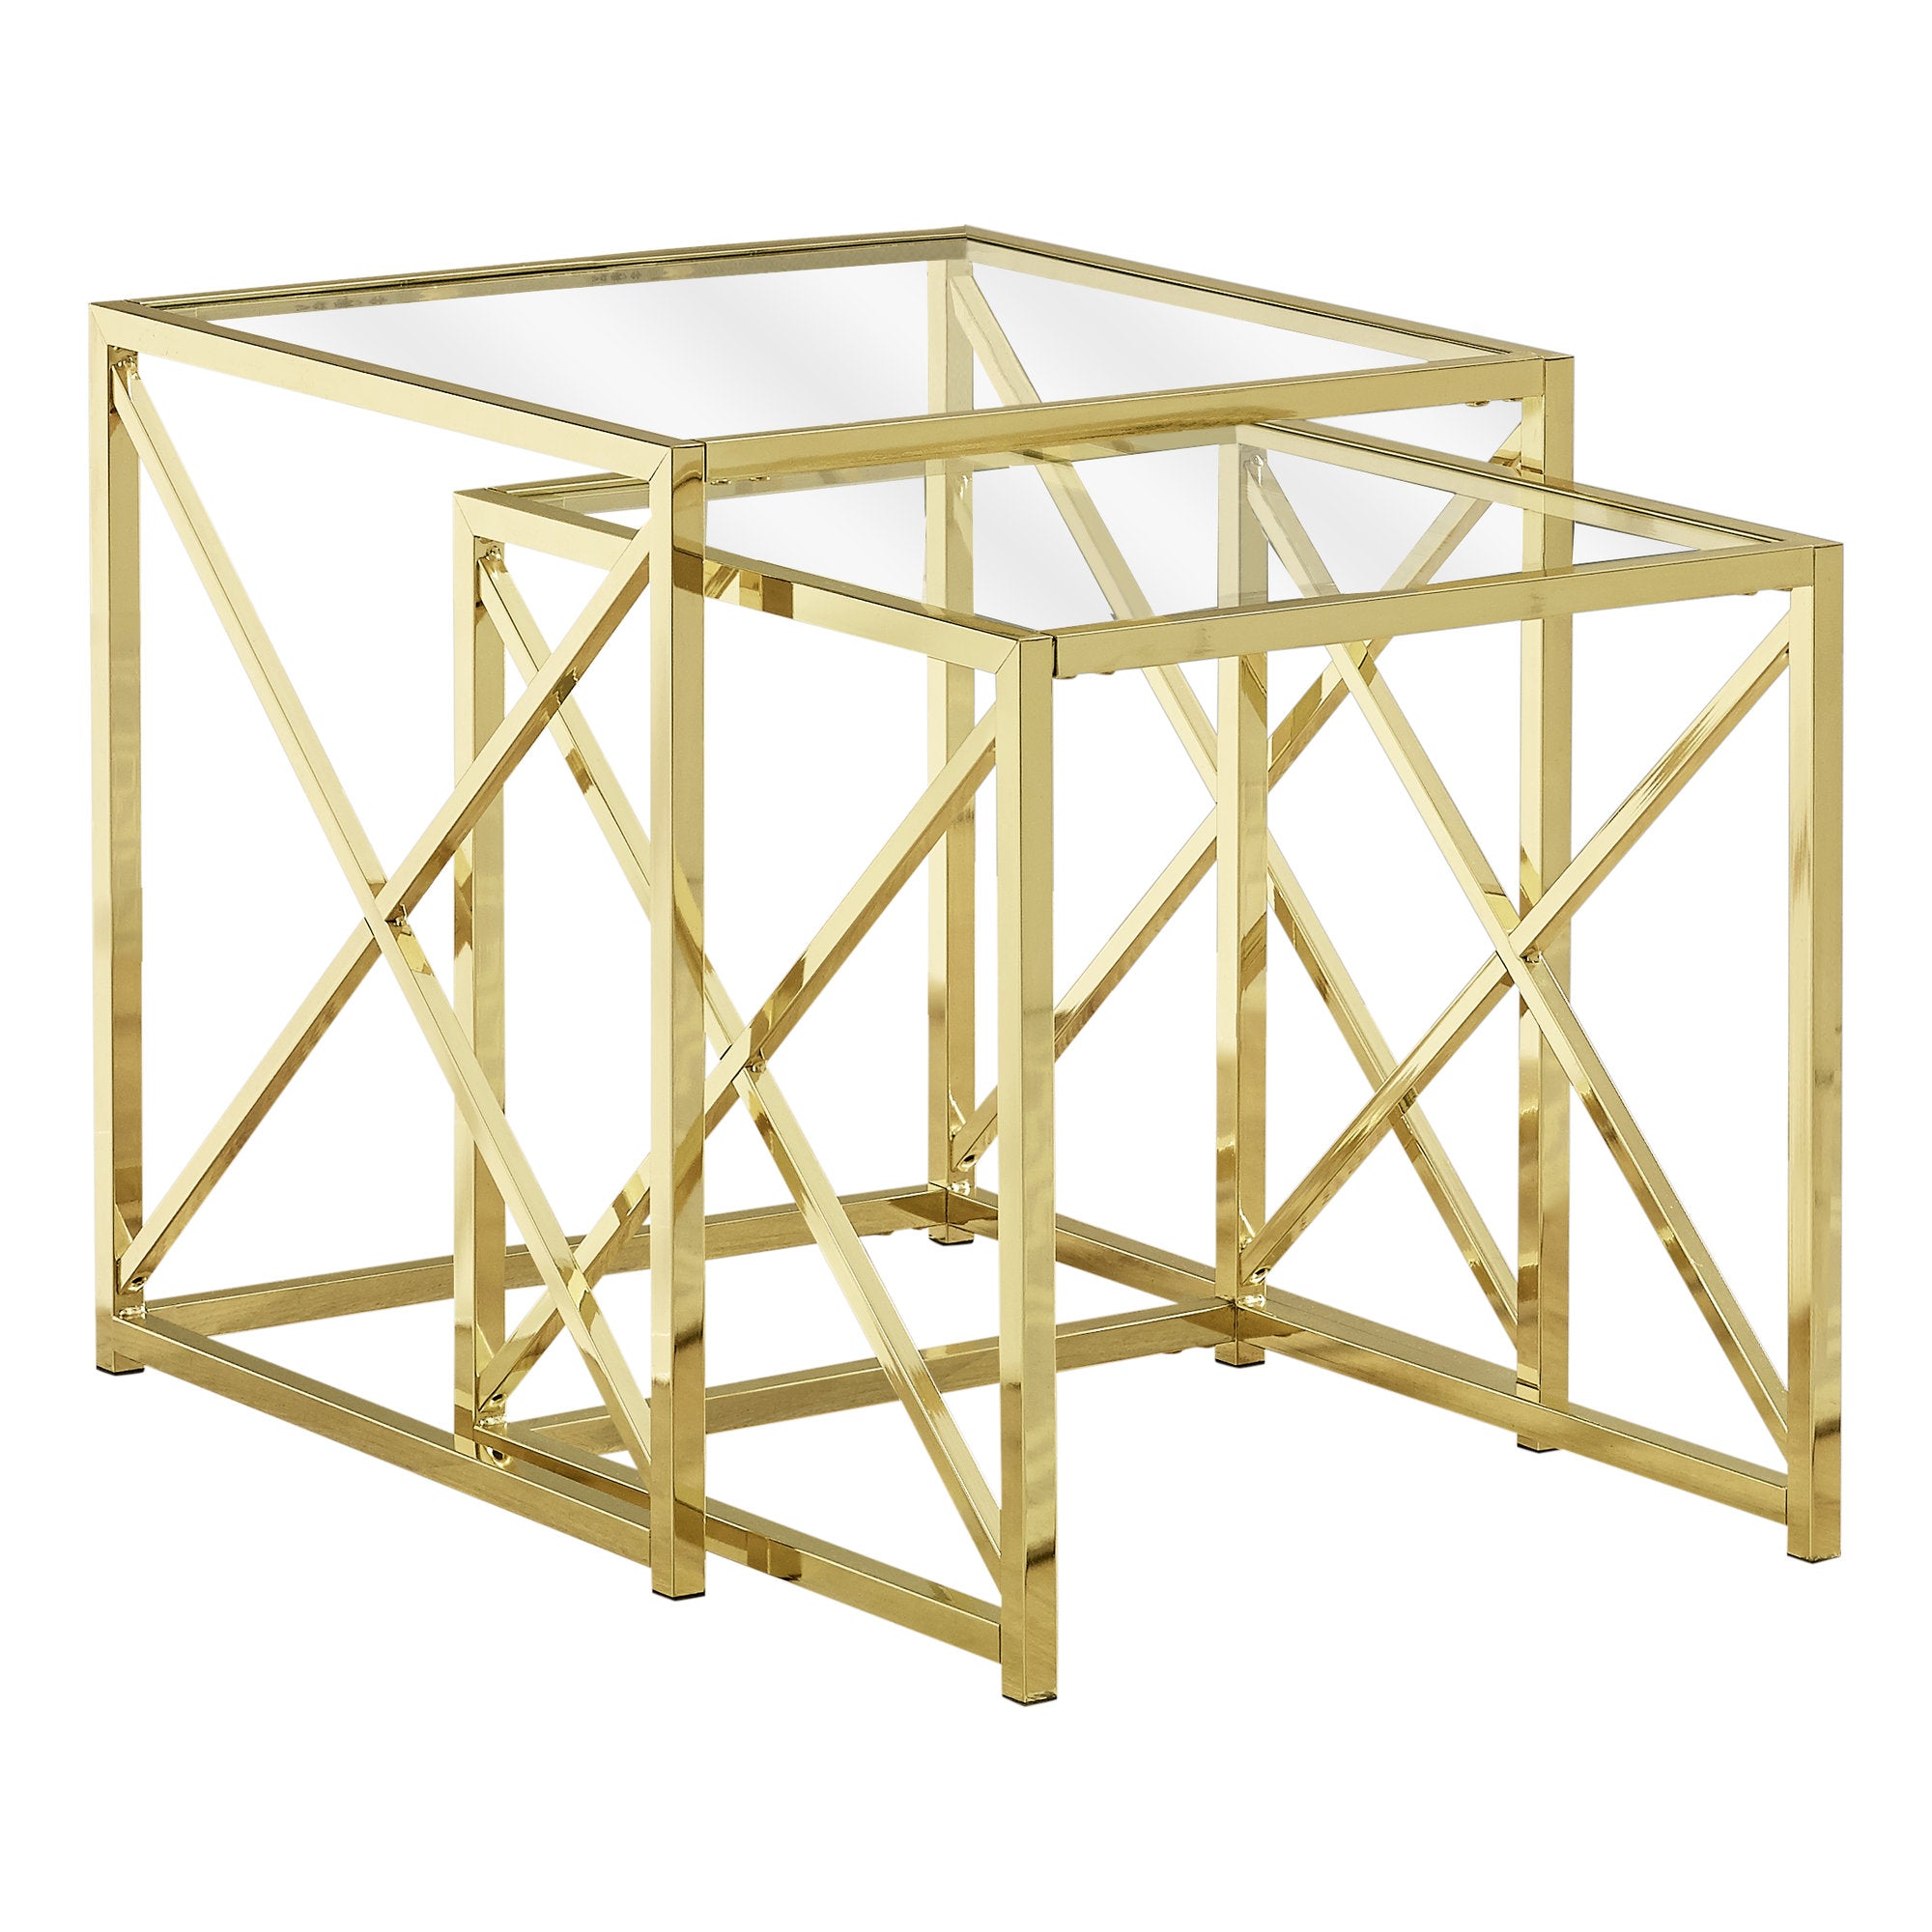 MN-663445    Nesting Table, Set Of 2, Side, End, Tempered Glass, Accent, Living Room, Bedroom, Metal Base, Tempered Glass, Clear, Gold, Contemporary, Modern